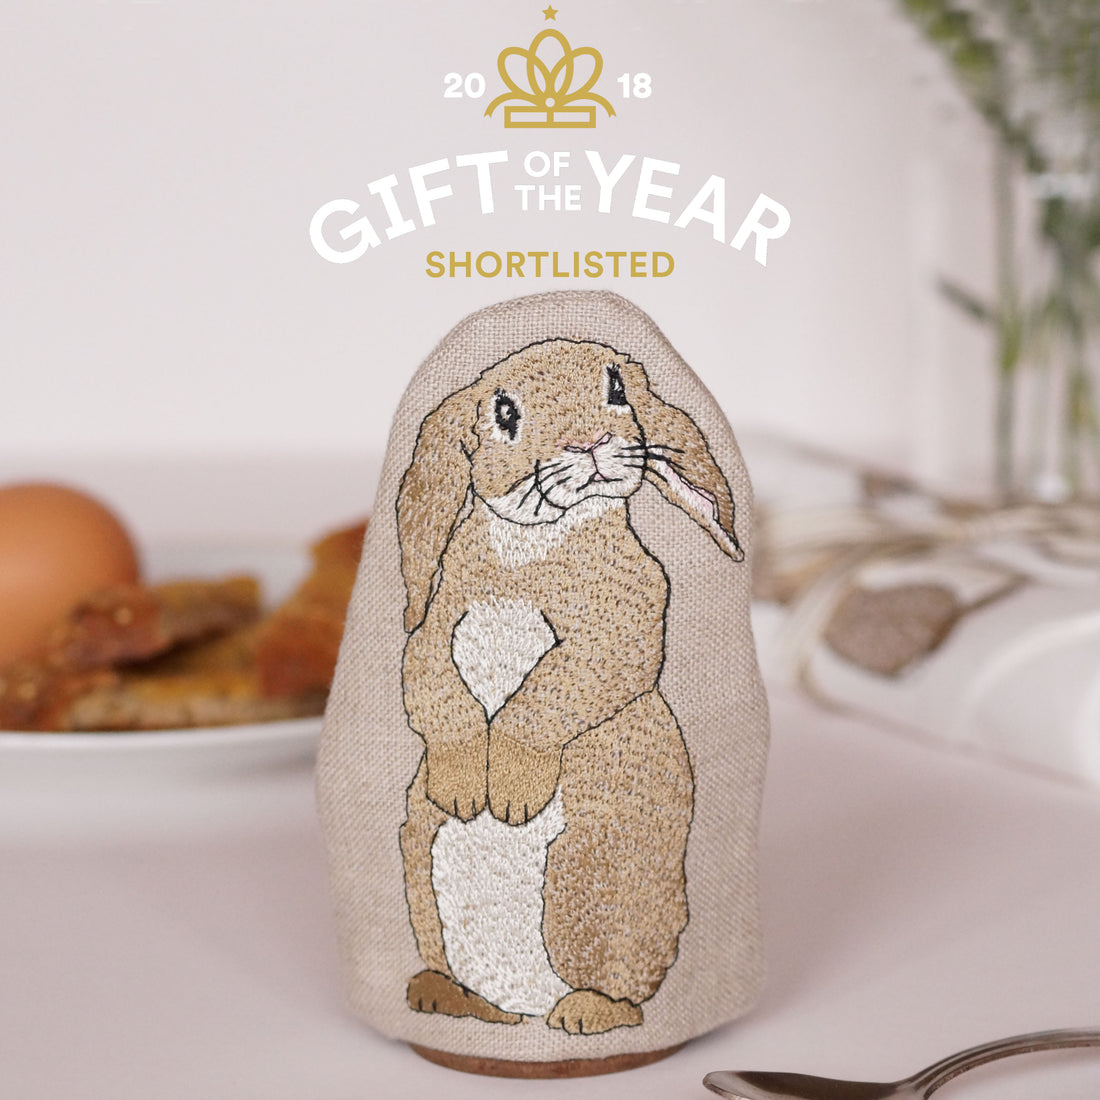 Rabbit Egg Cosy Shortlisted for the Gift of the Year Award 2018